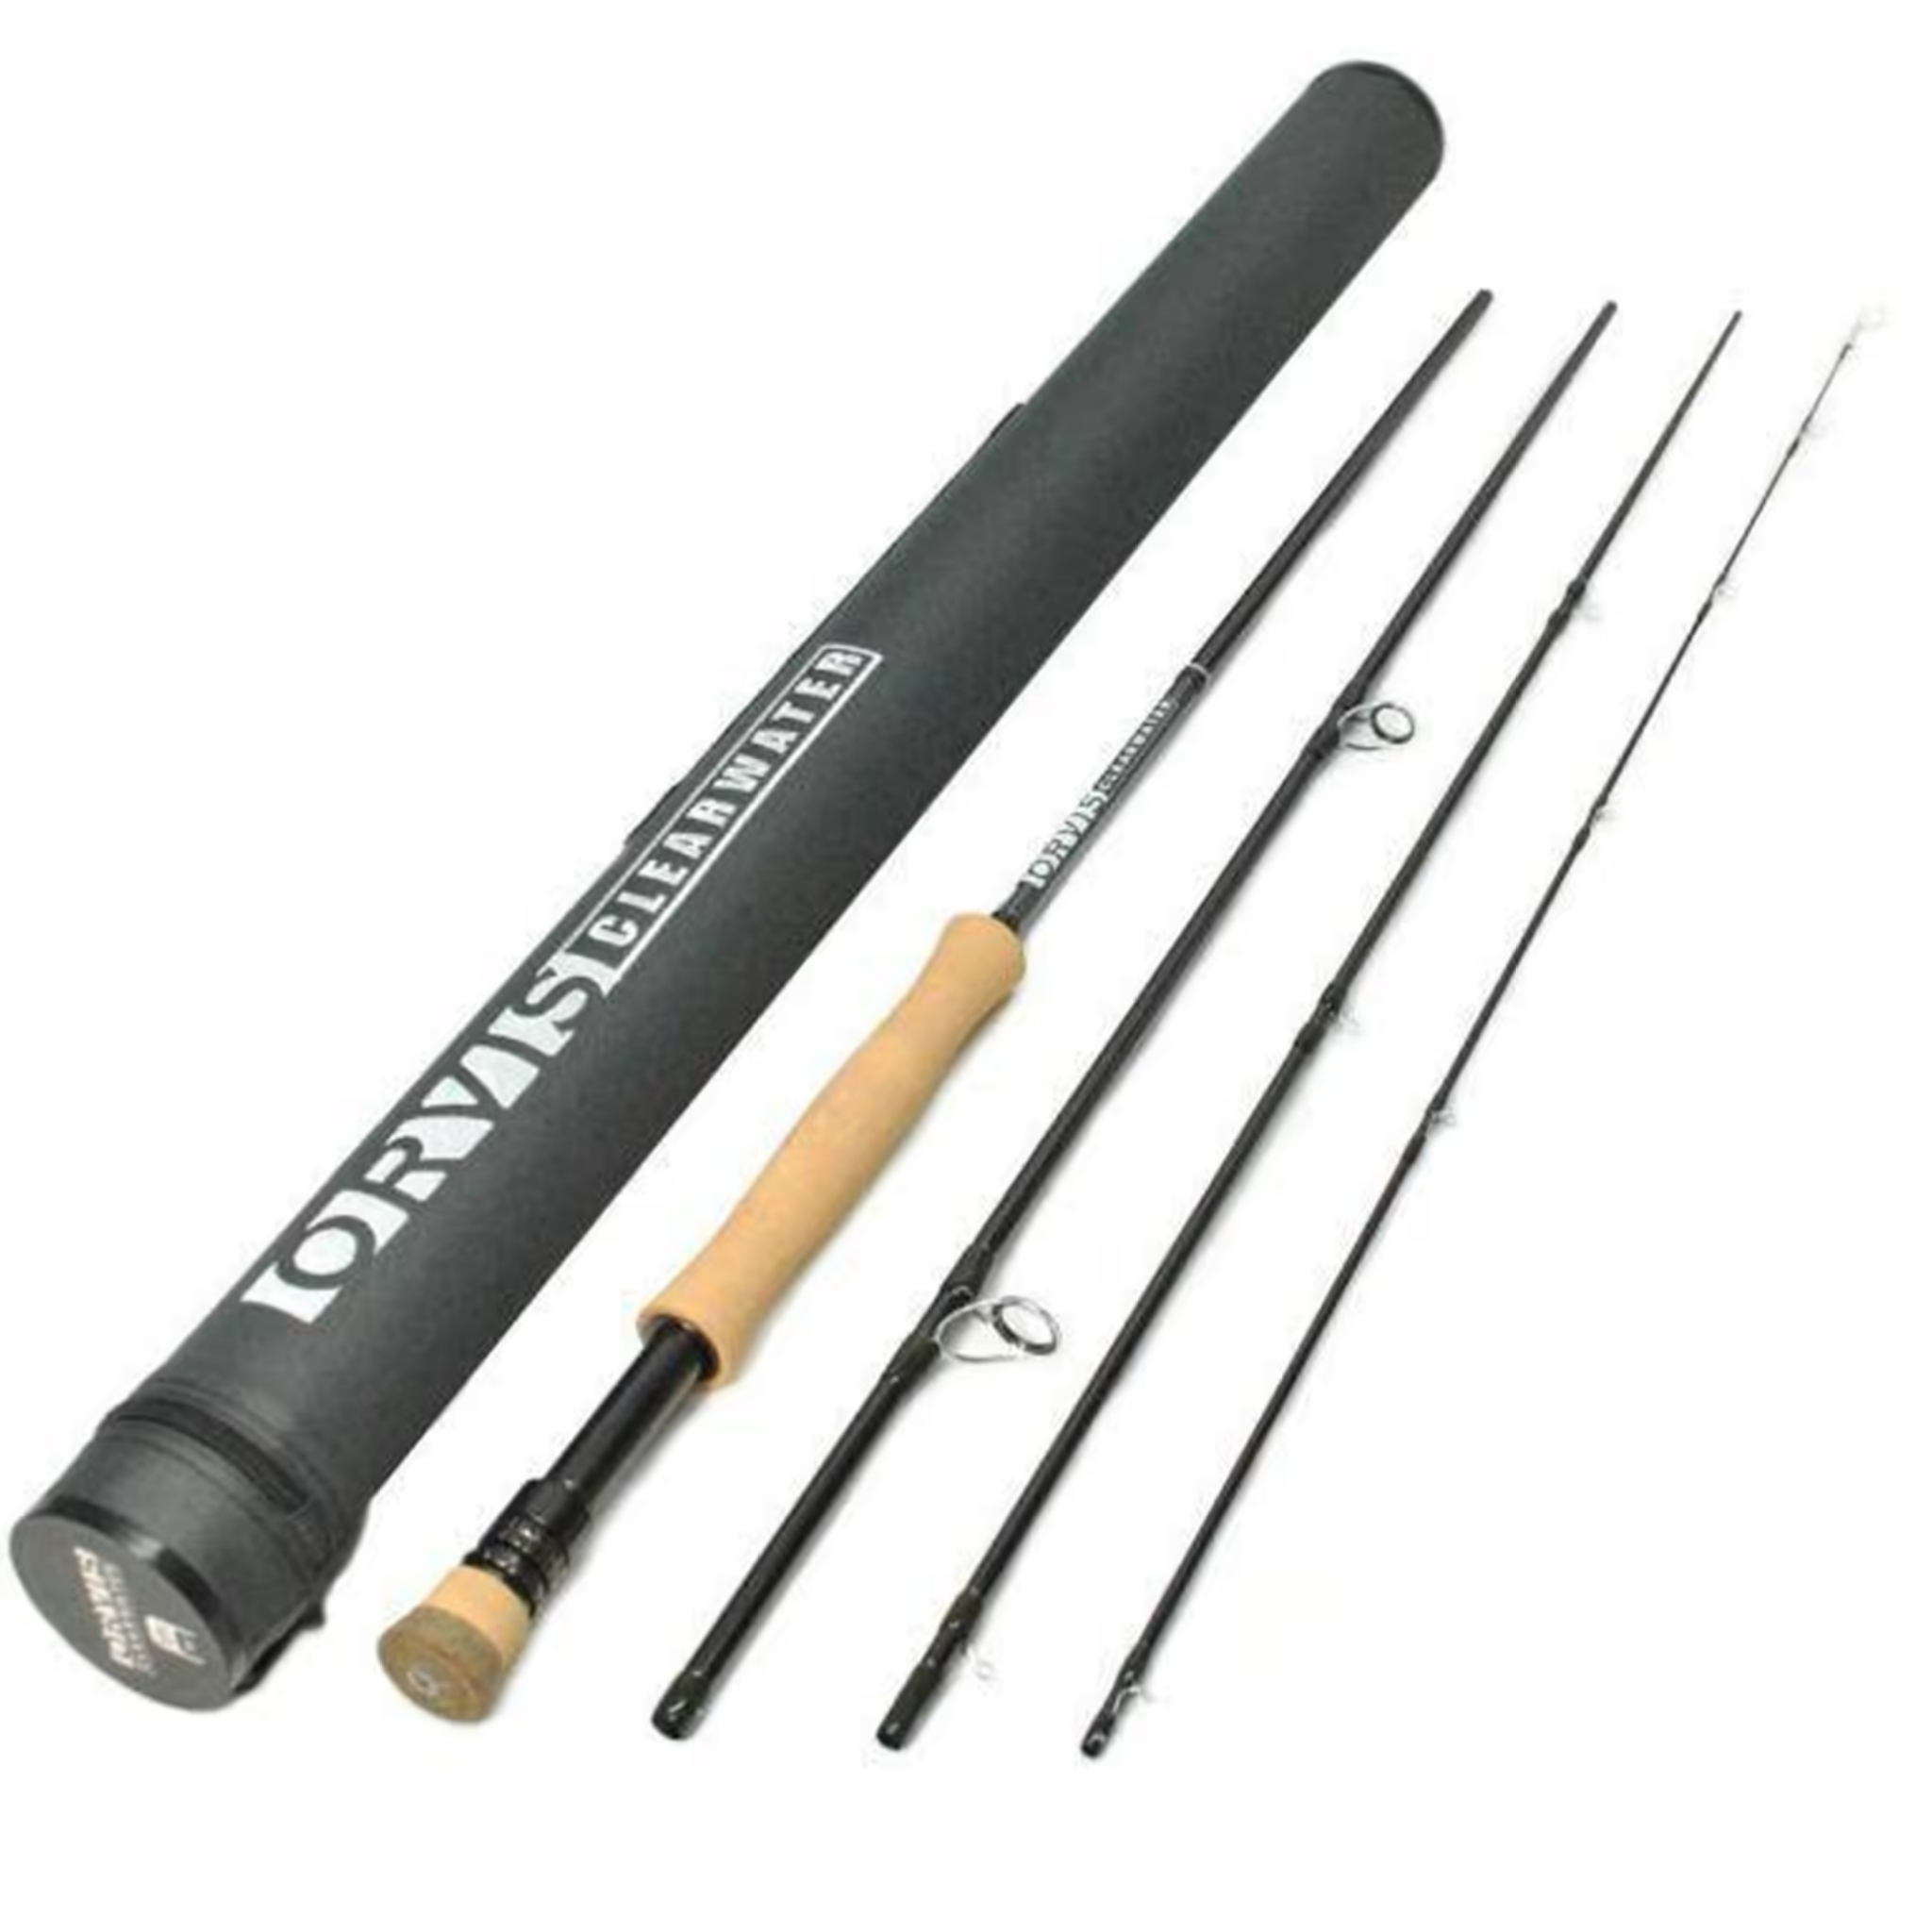 Orvis Clearwater 8'6 5-weight Fly Rod